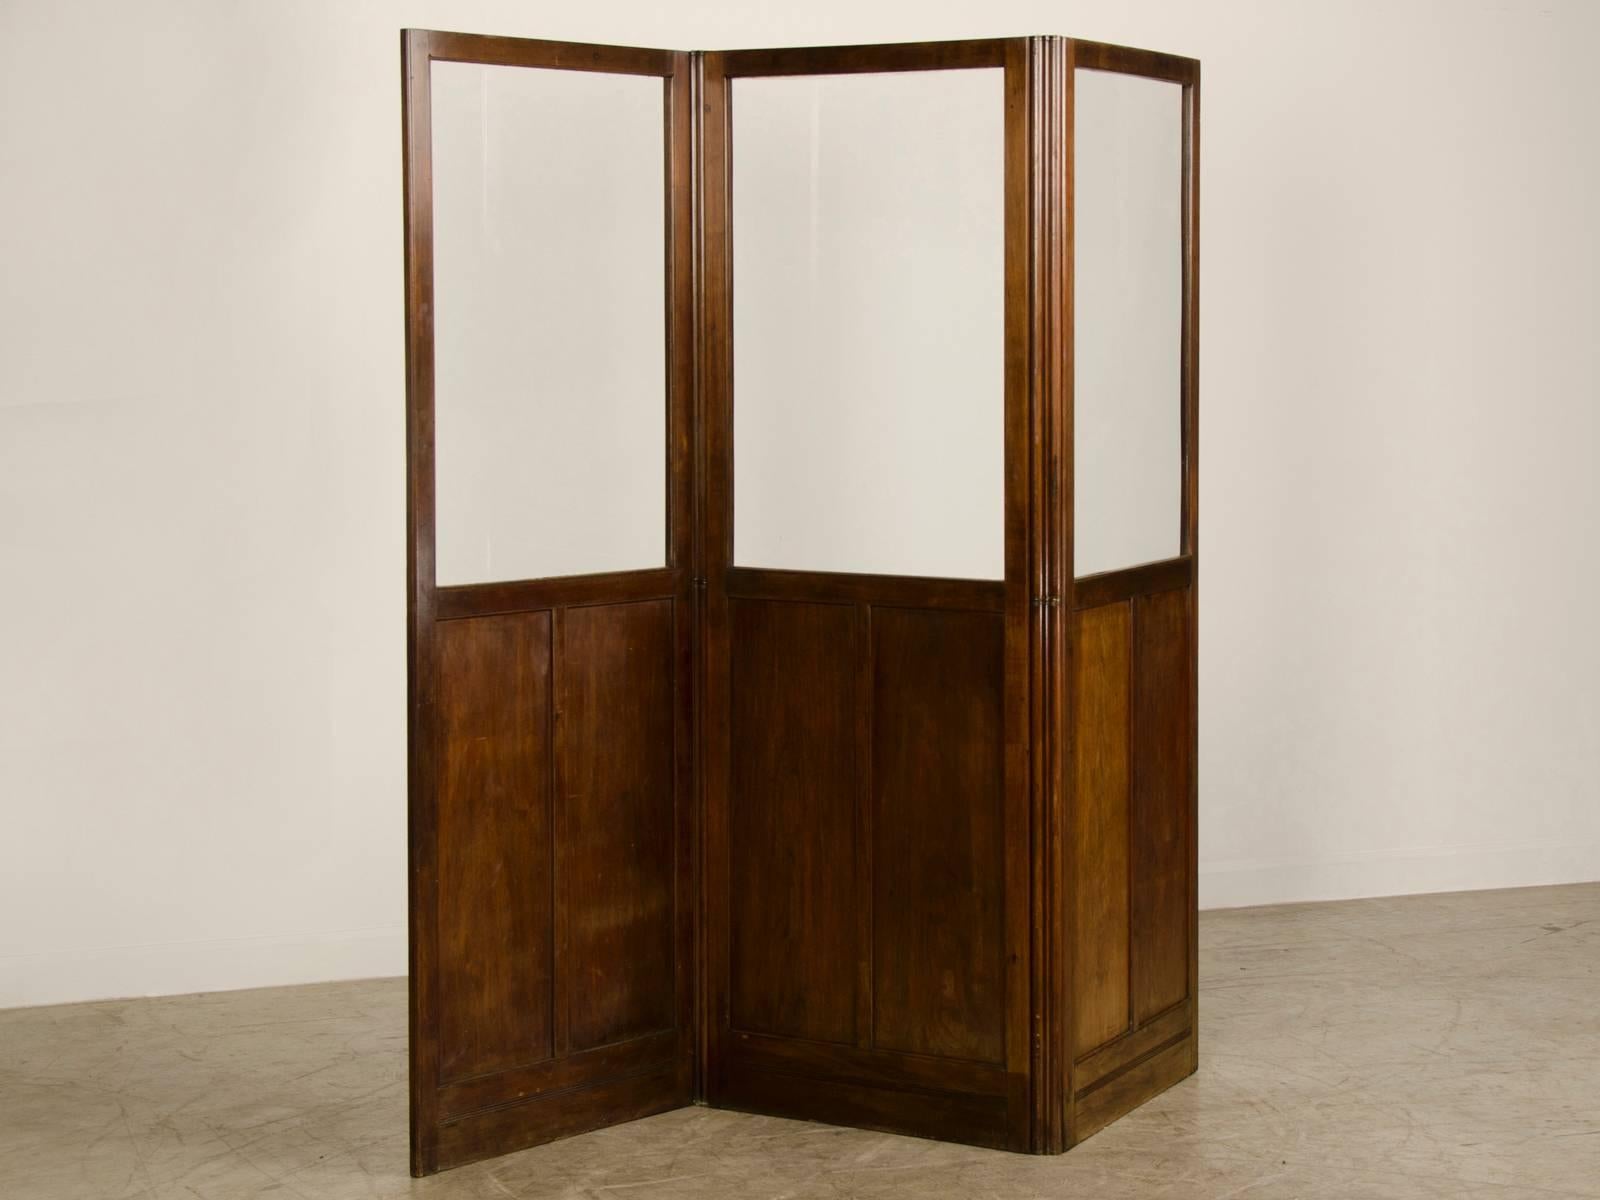 Receive our new selections direct from 1stdibs by email each week. Please click Follow Dealer below and see them first!

A very large antique English mahogany and glass folding screen, circa 1860. This amazing artifact from nineteenth century